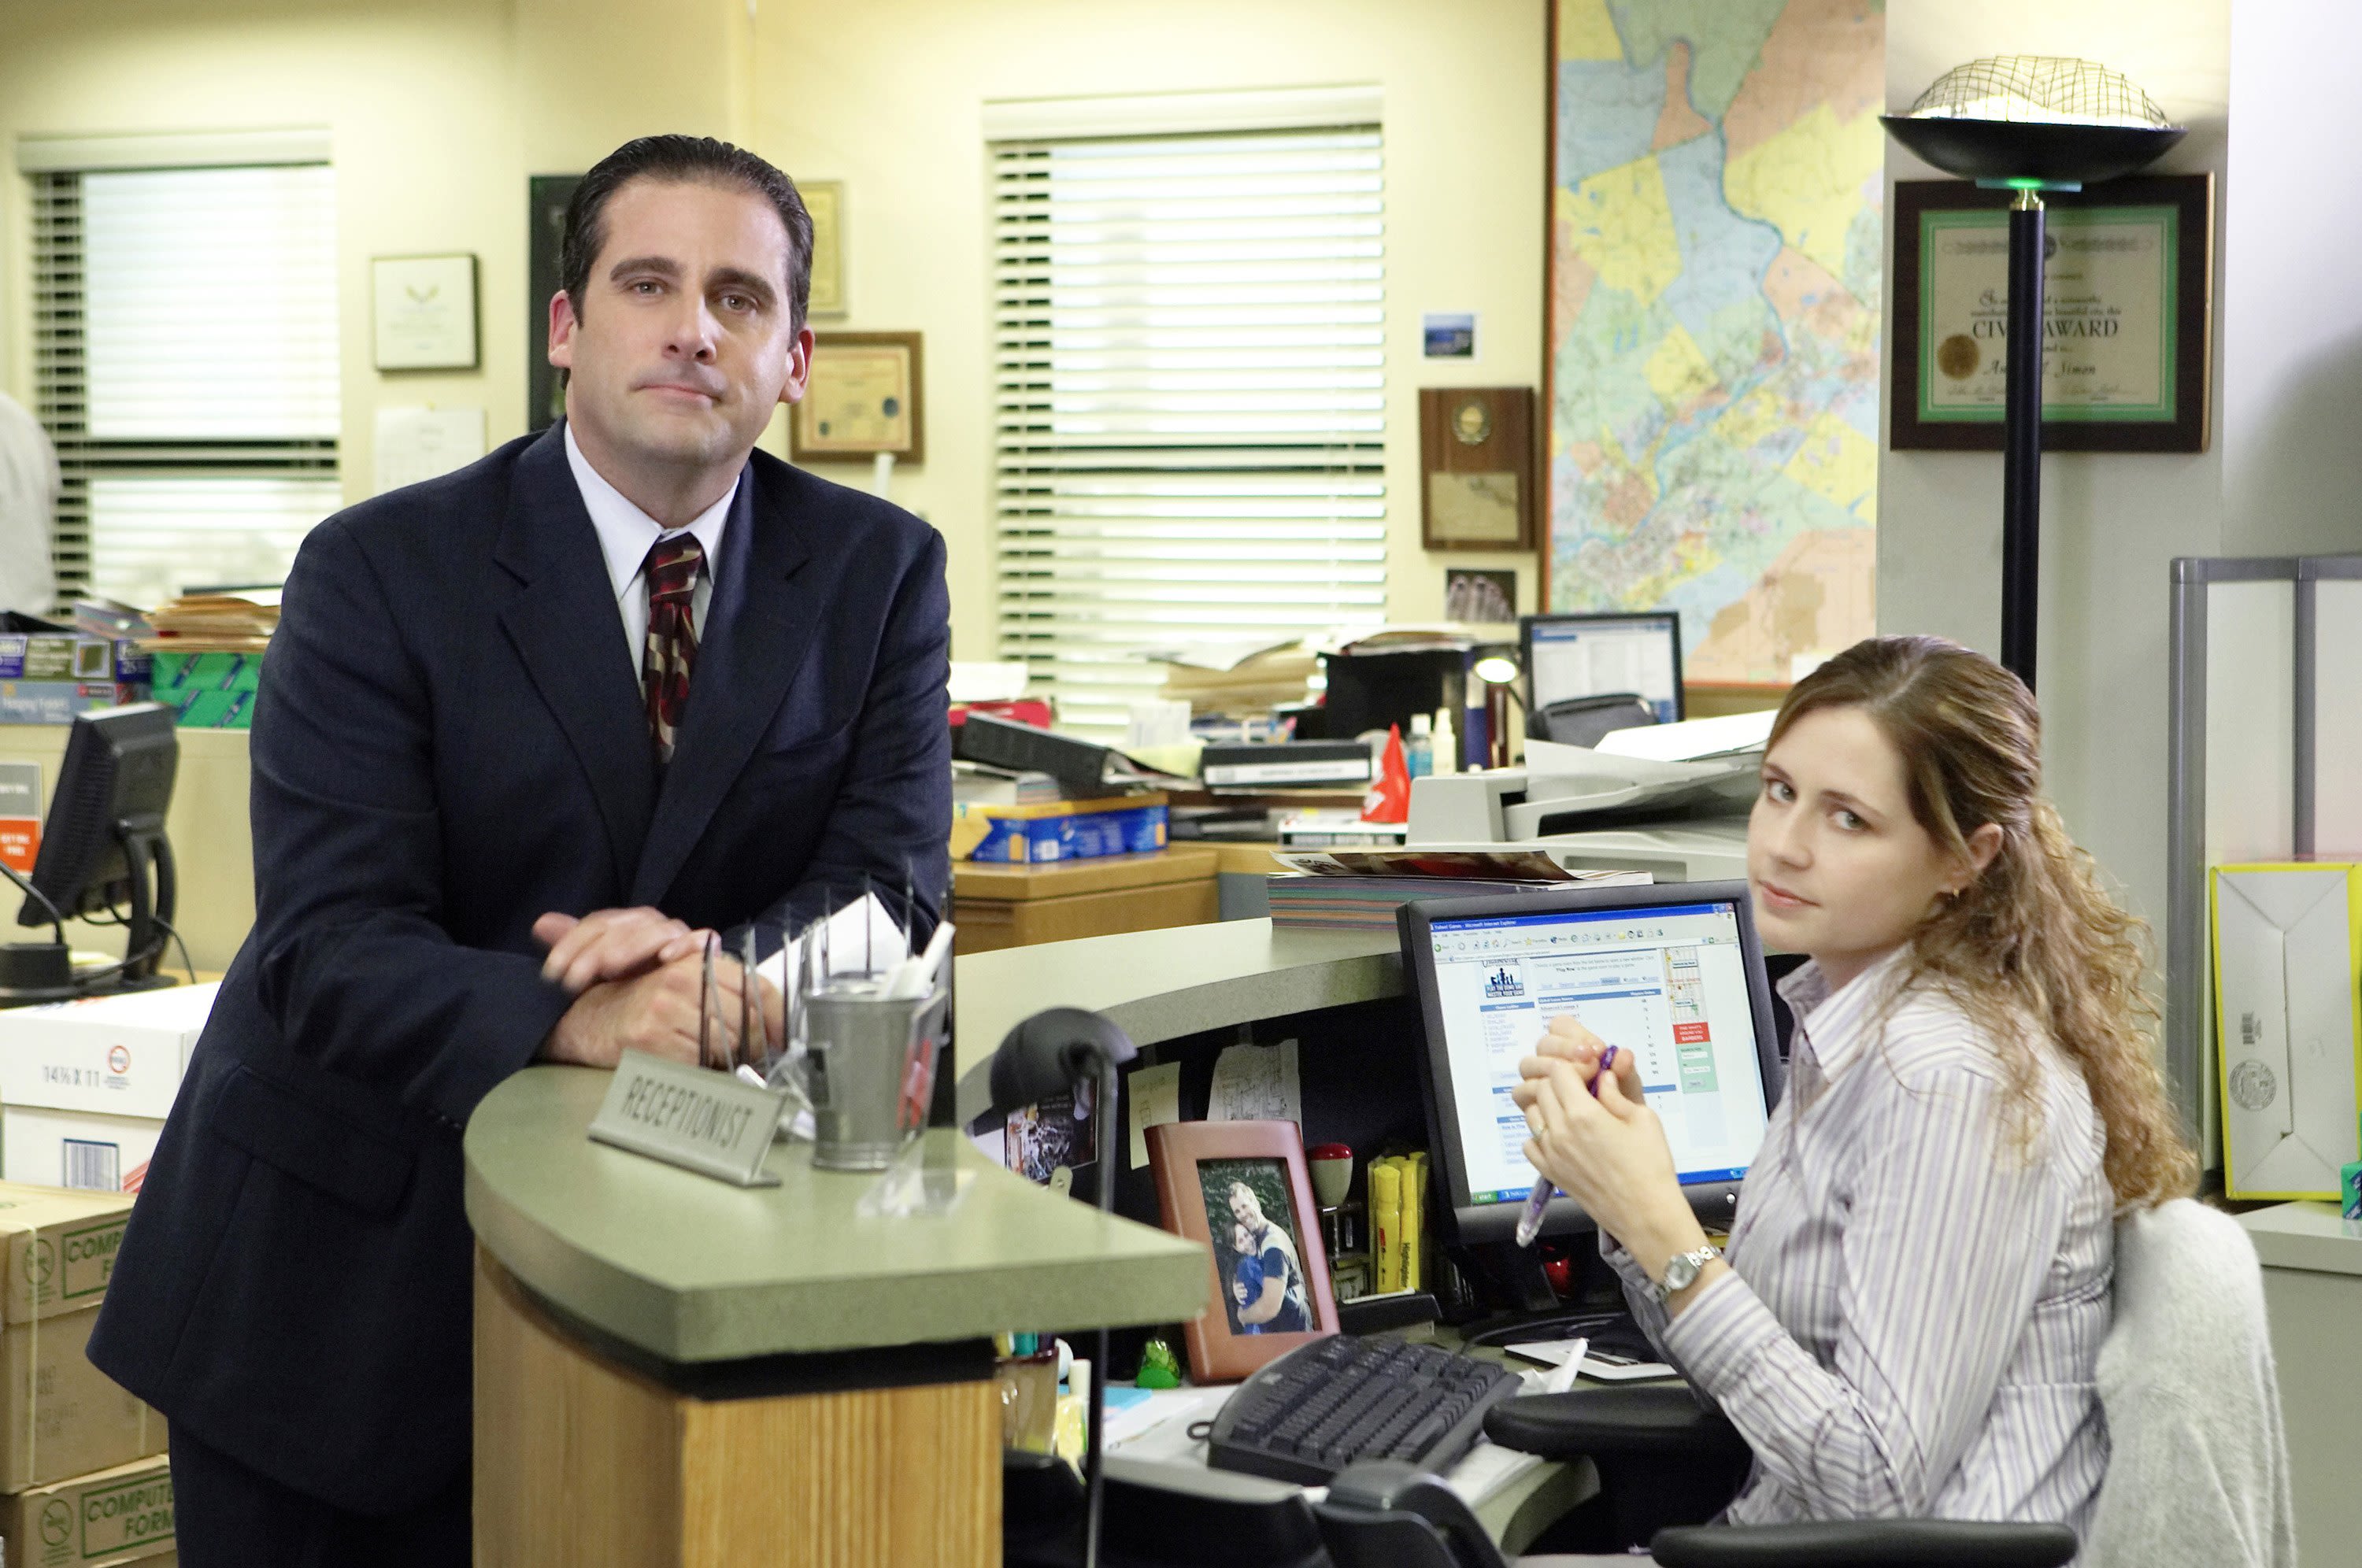 NBC will stream 'The Office.' Here's why it's paying $500 million